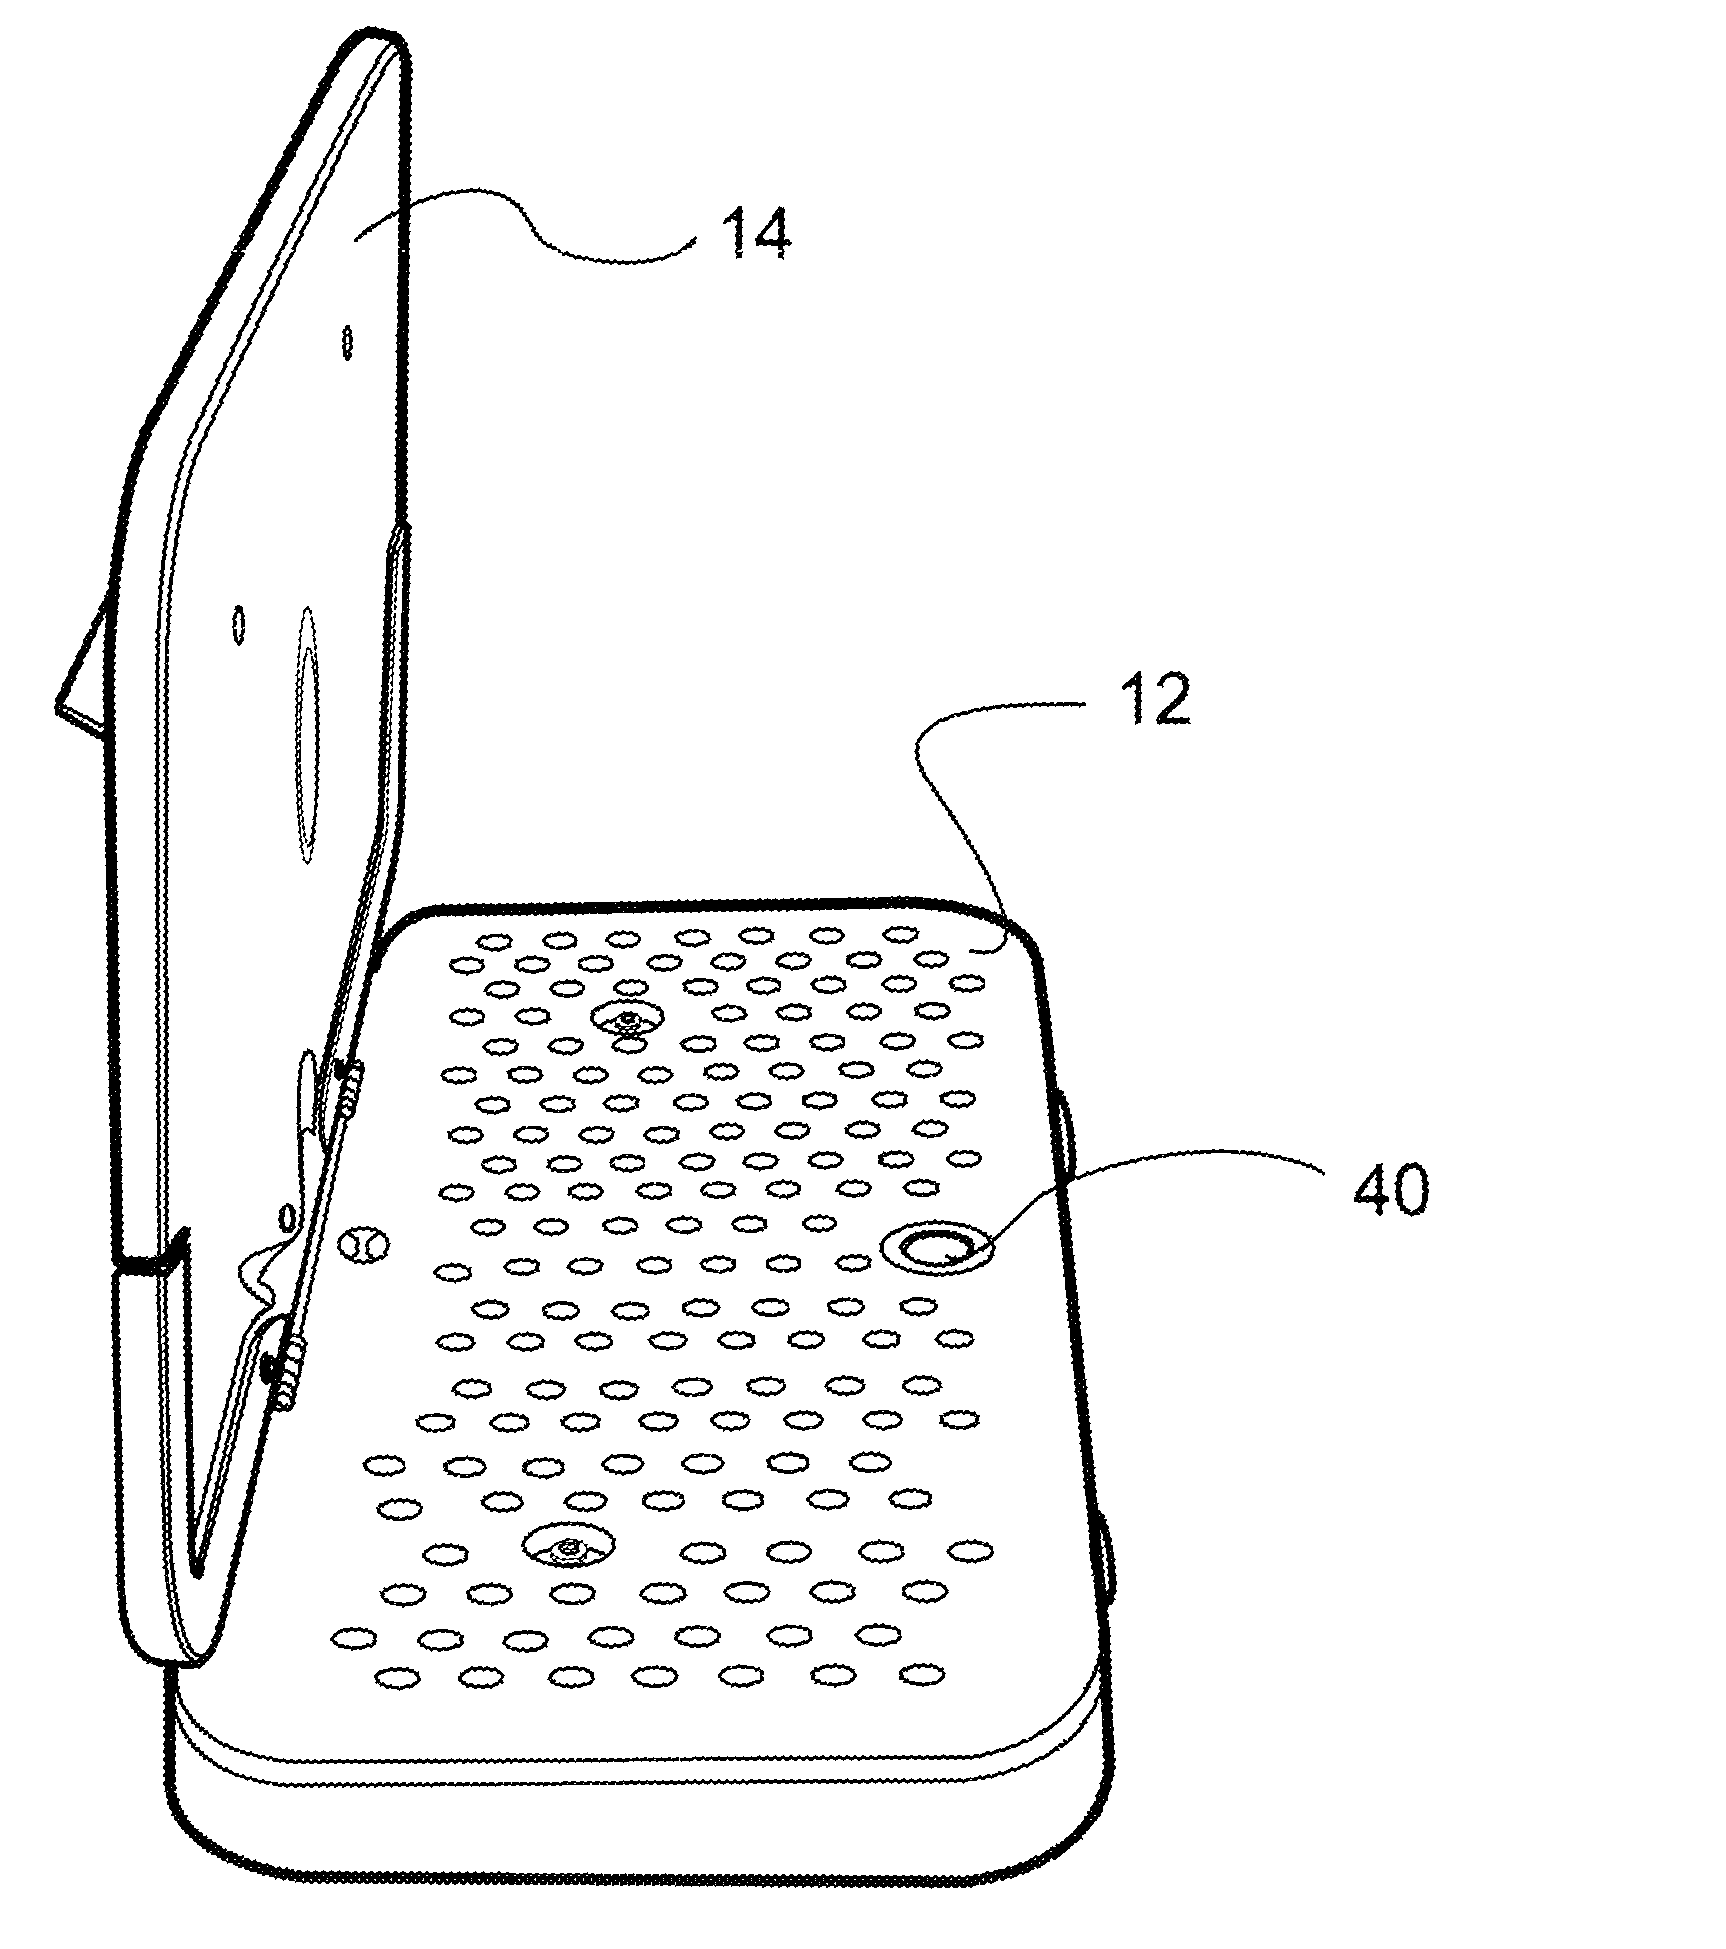 Ball game apparatus and method